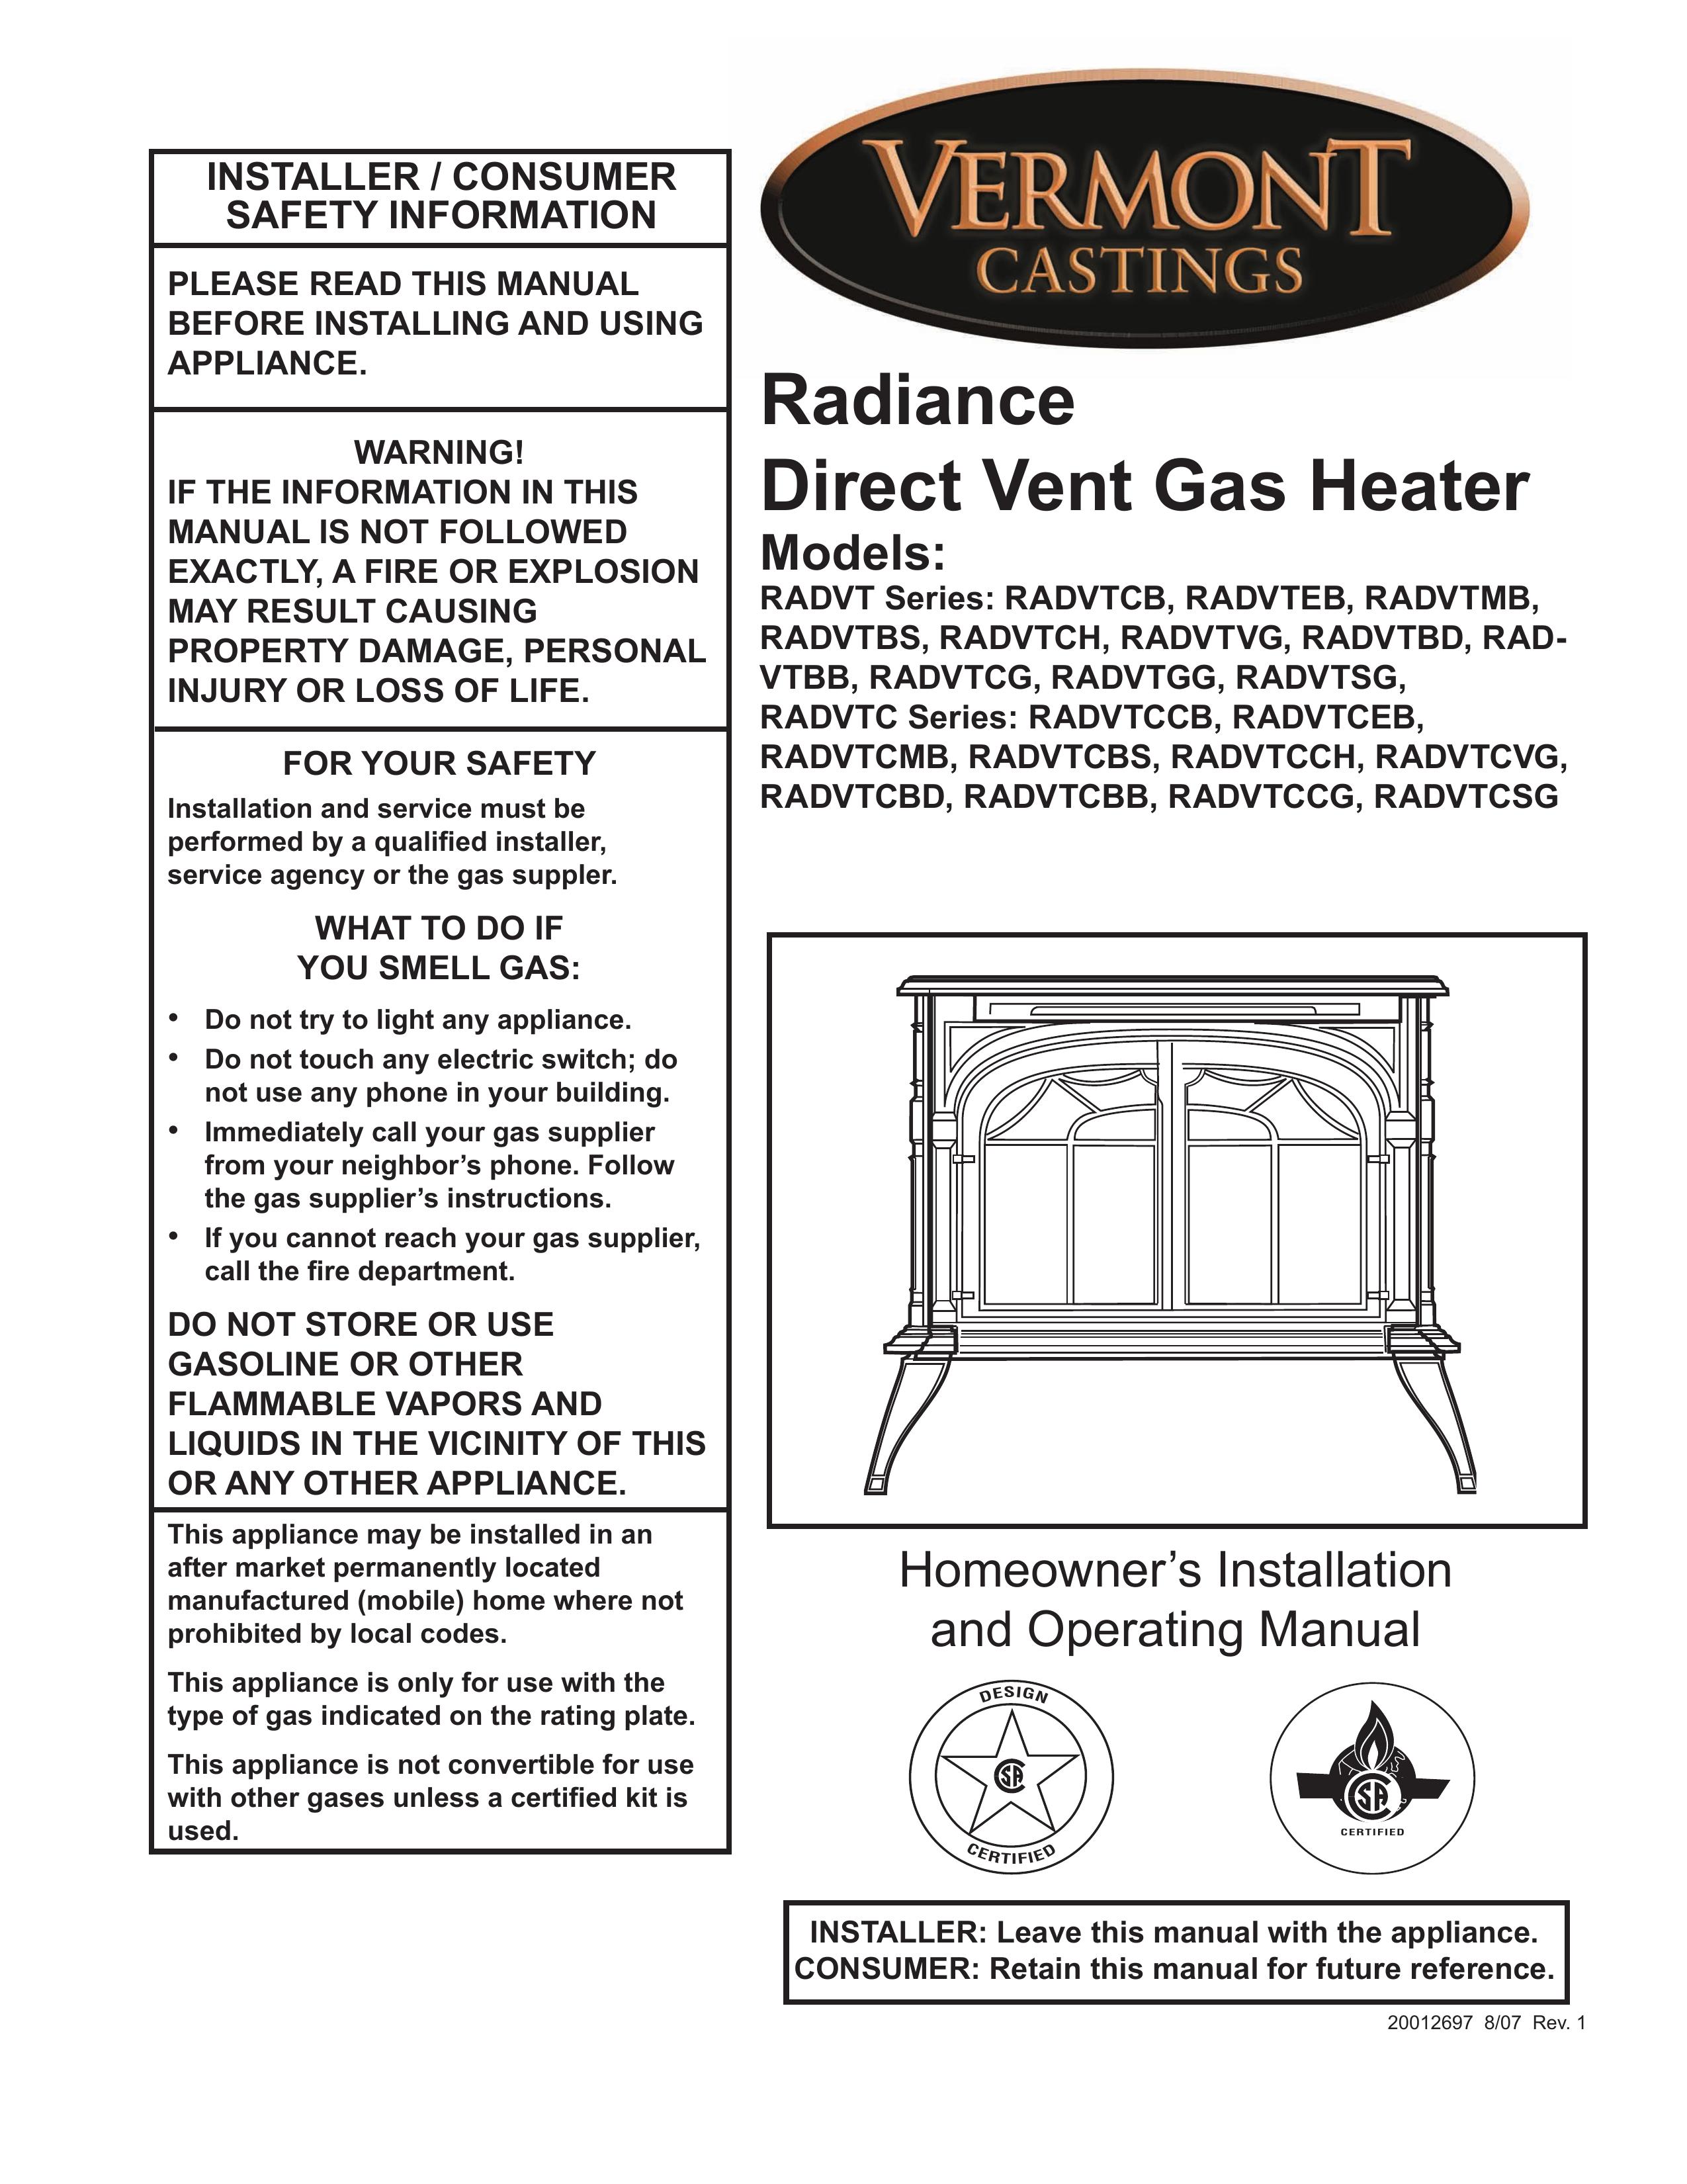 Vermont Casting RADVTCVG Outdoor Fireplace User Manual